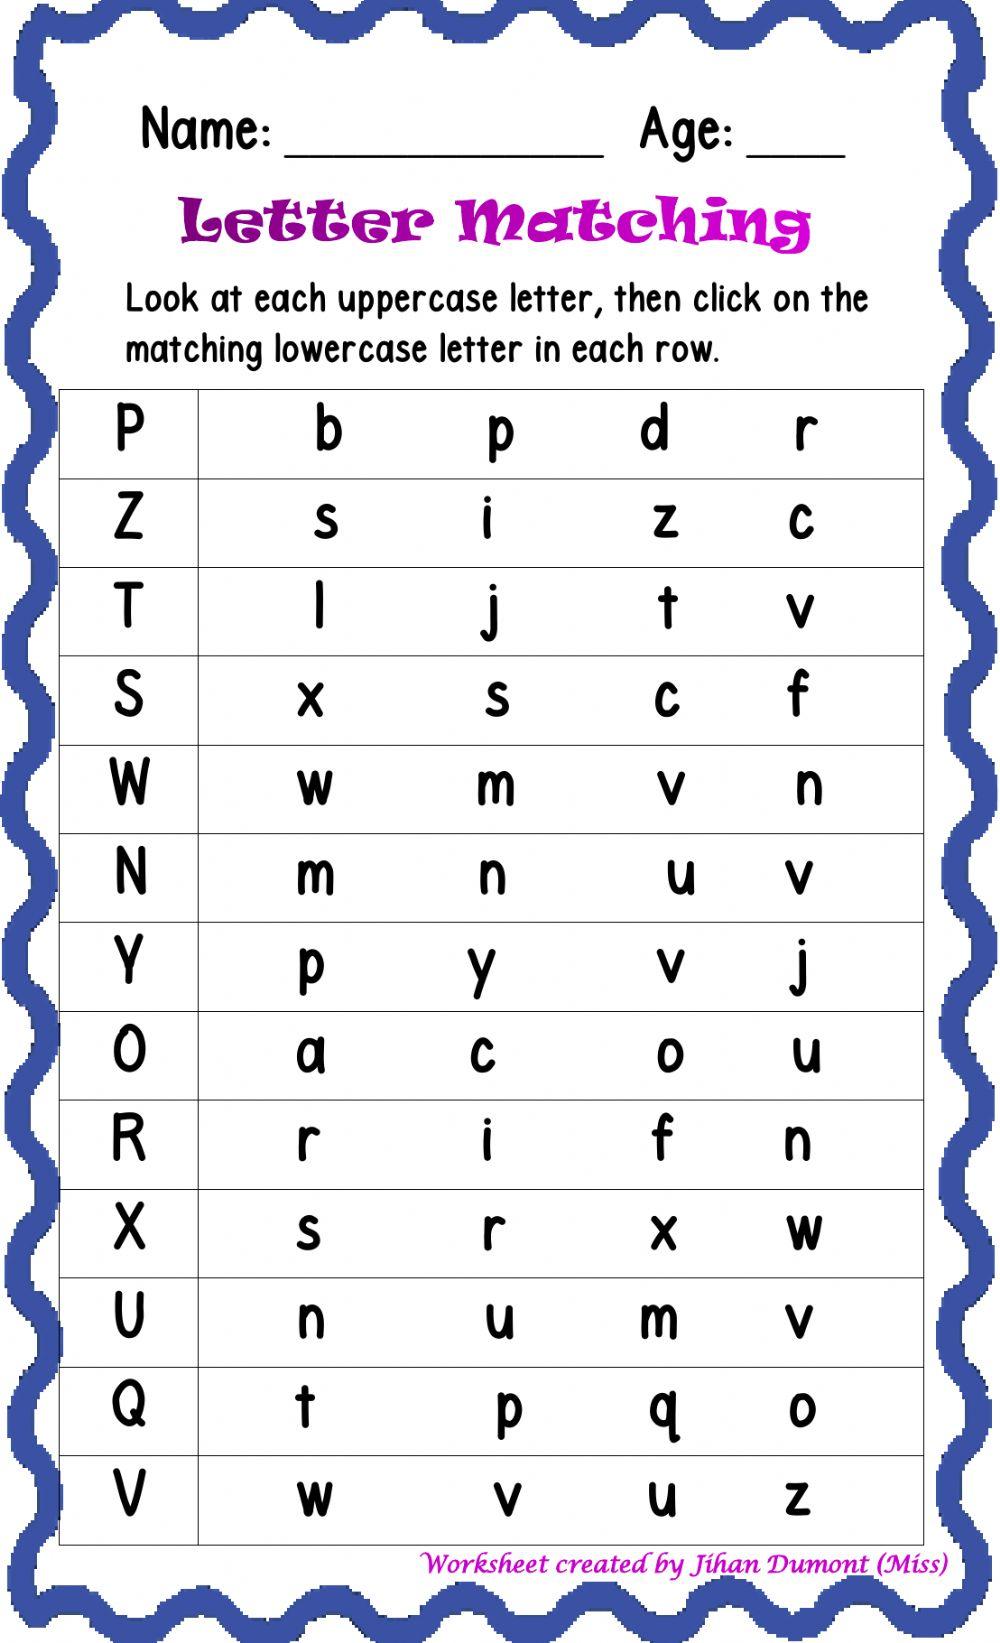 Letter Matching n-z